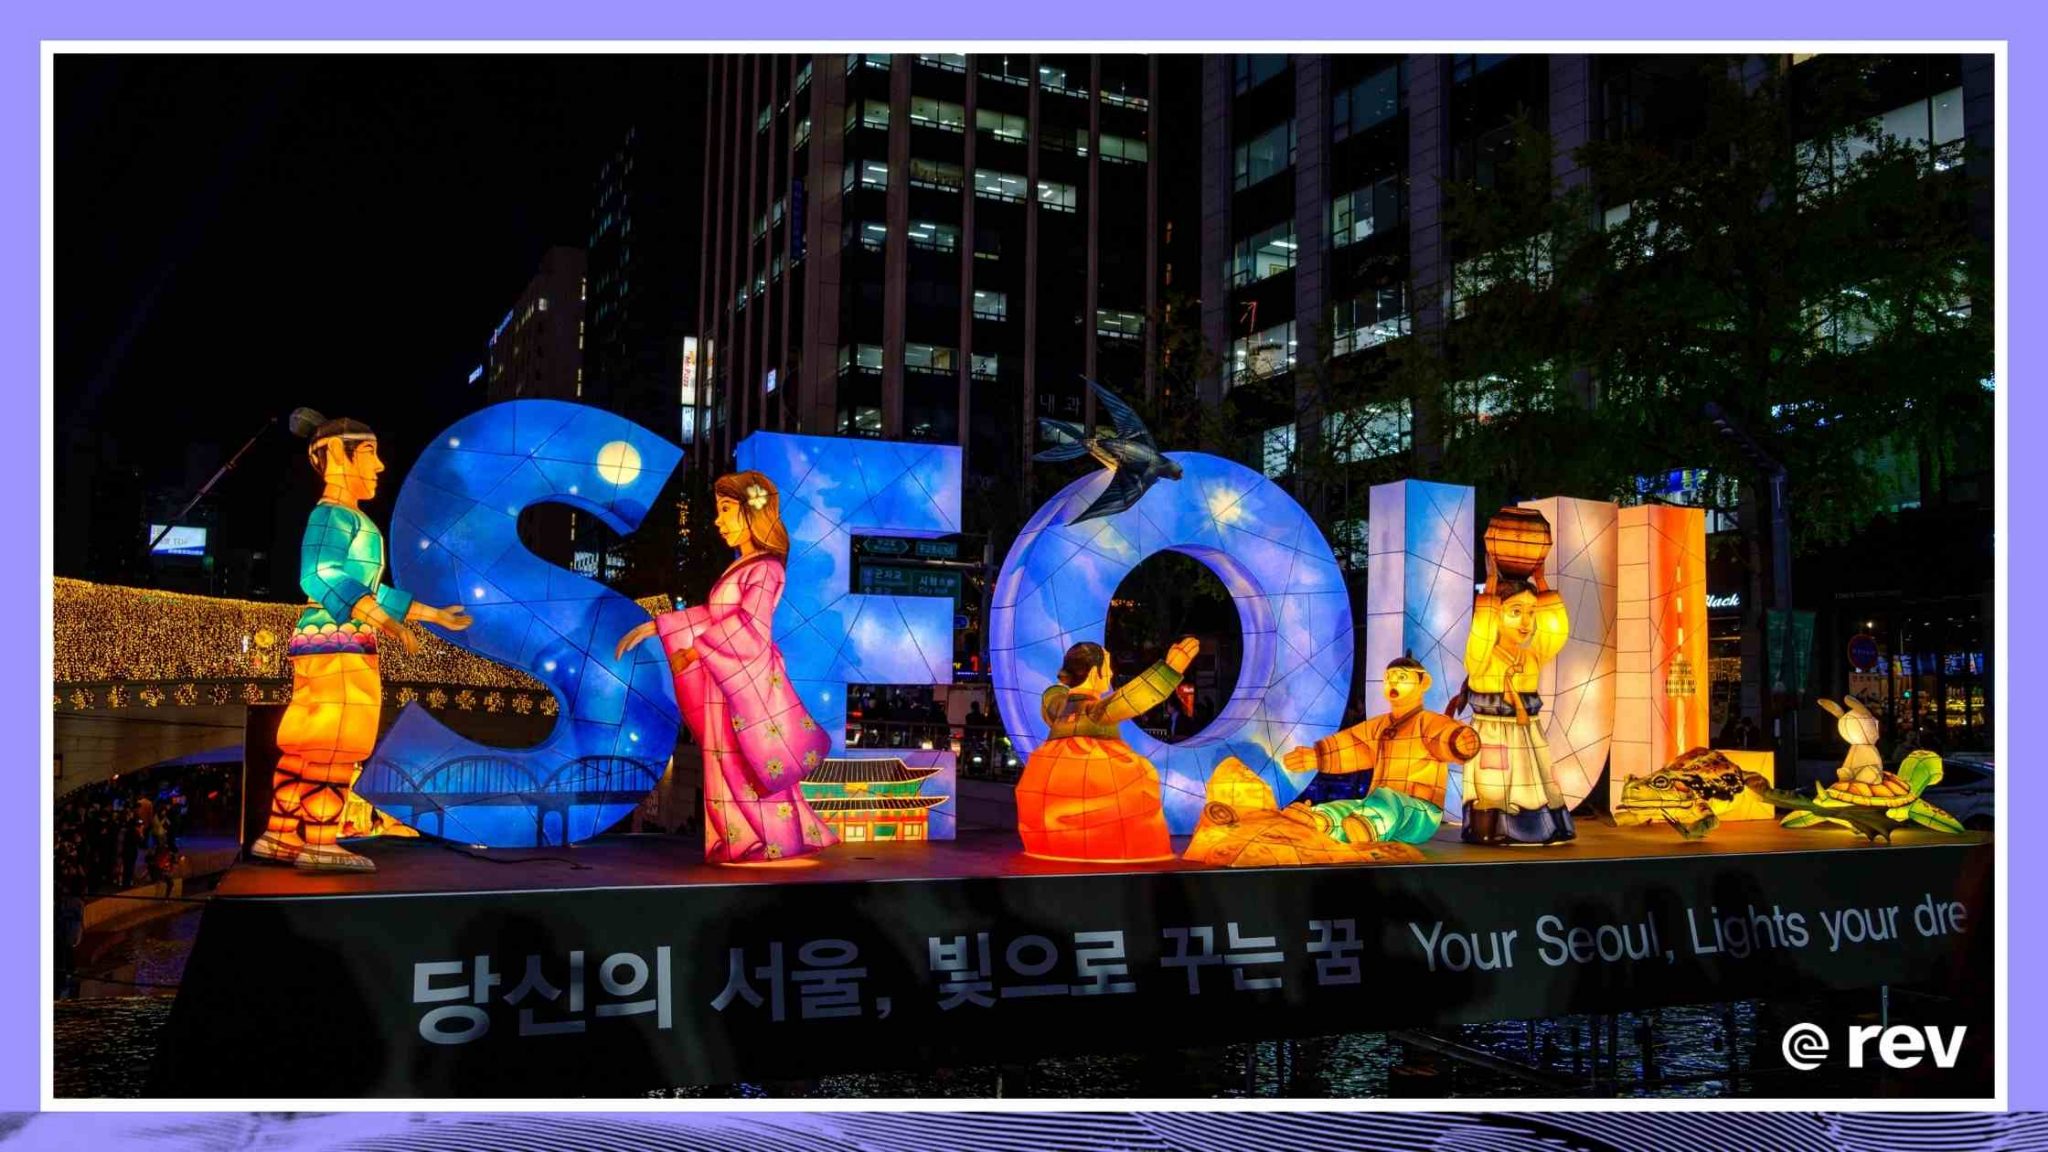 Crowd surge in Seoul at Halloween Celebrations Turns Deadly Transcript